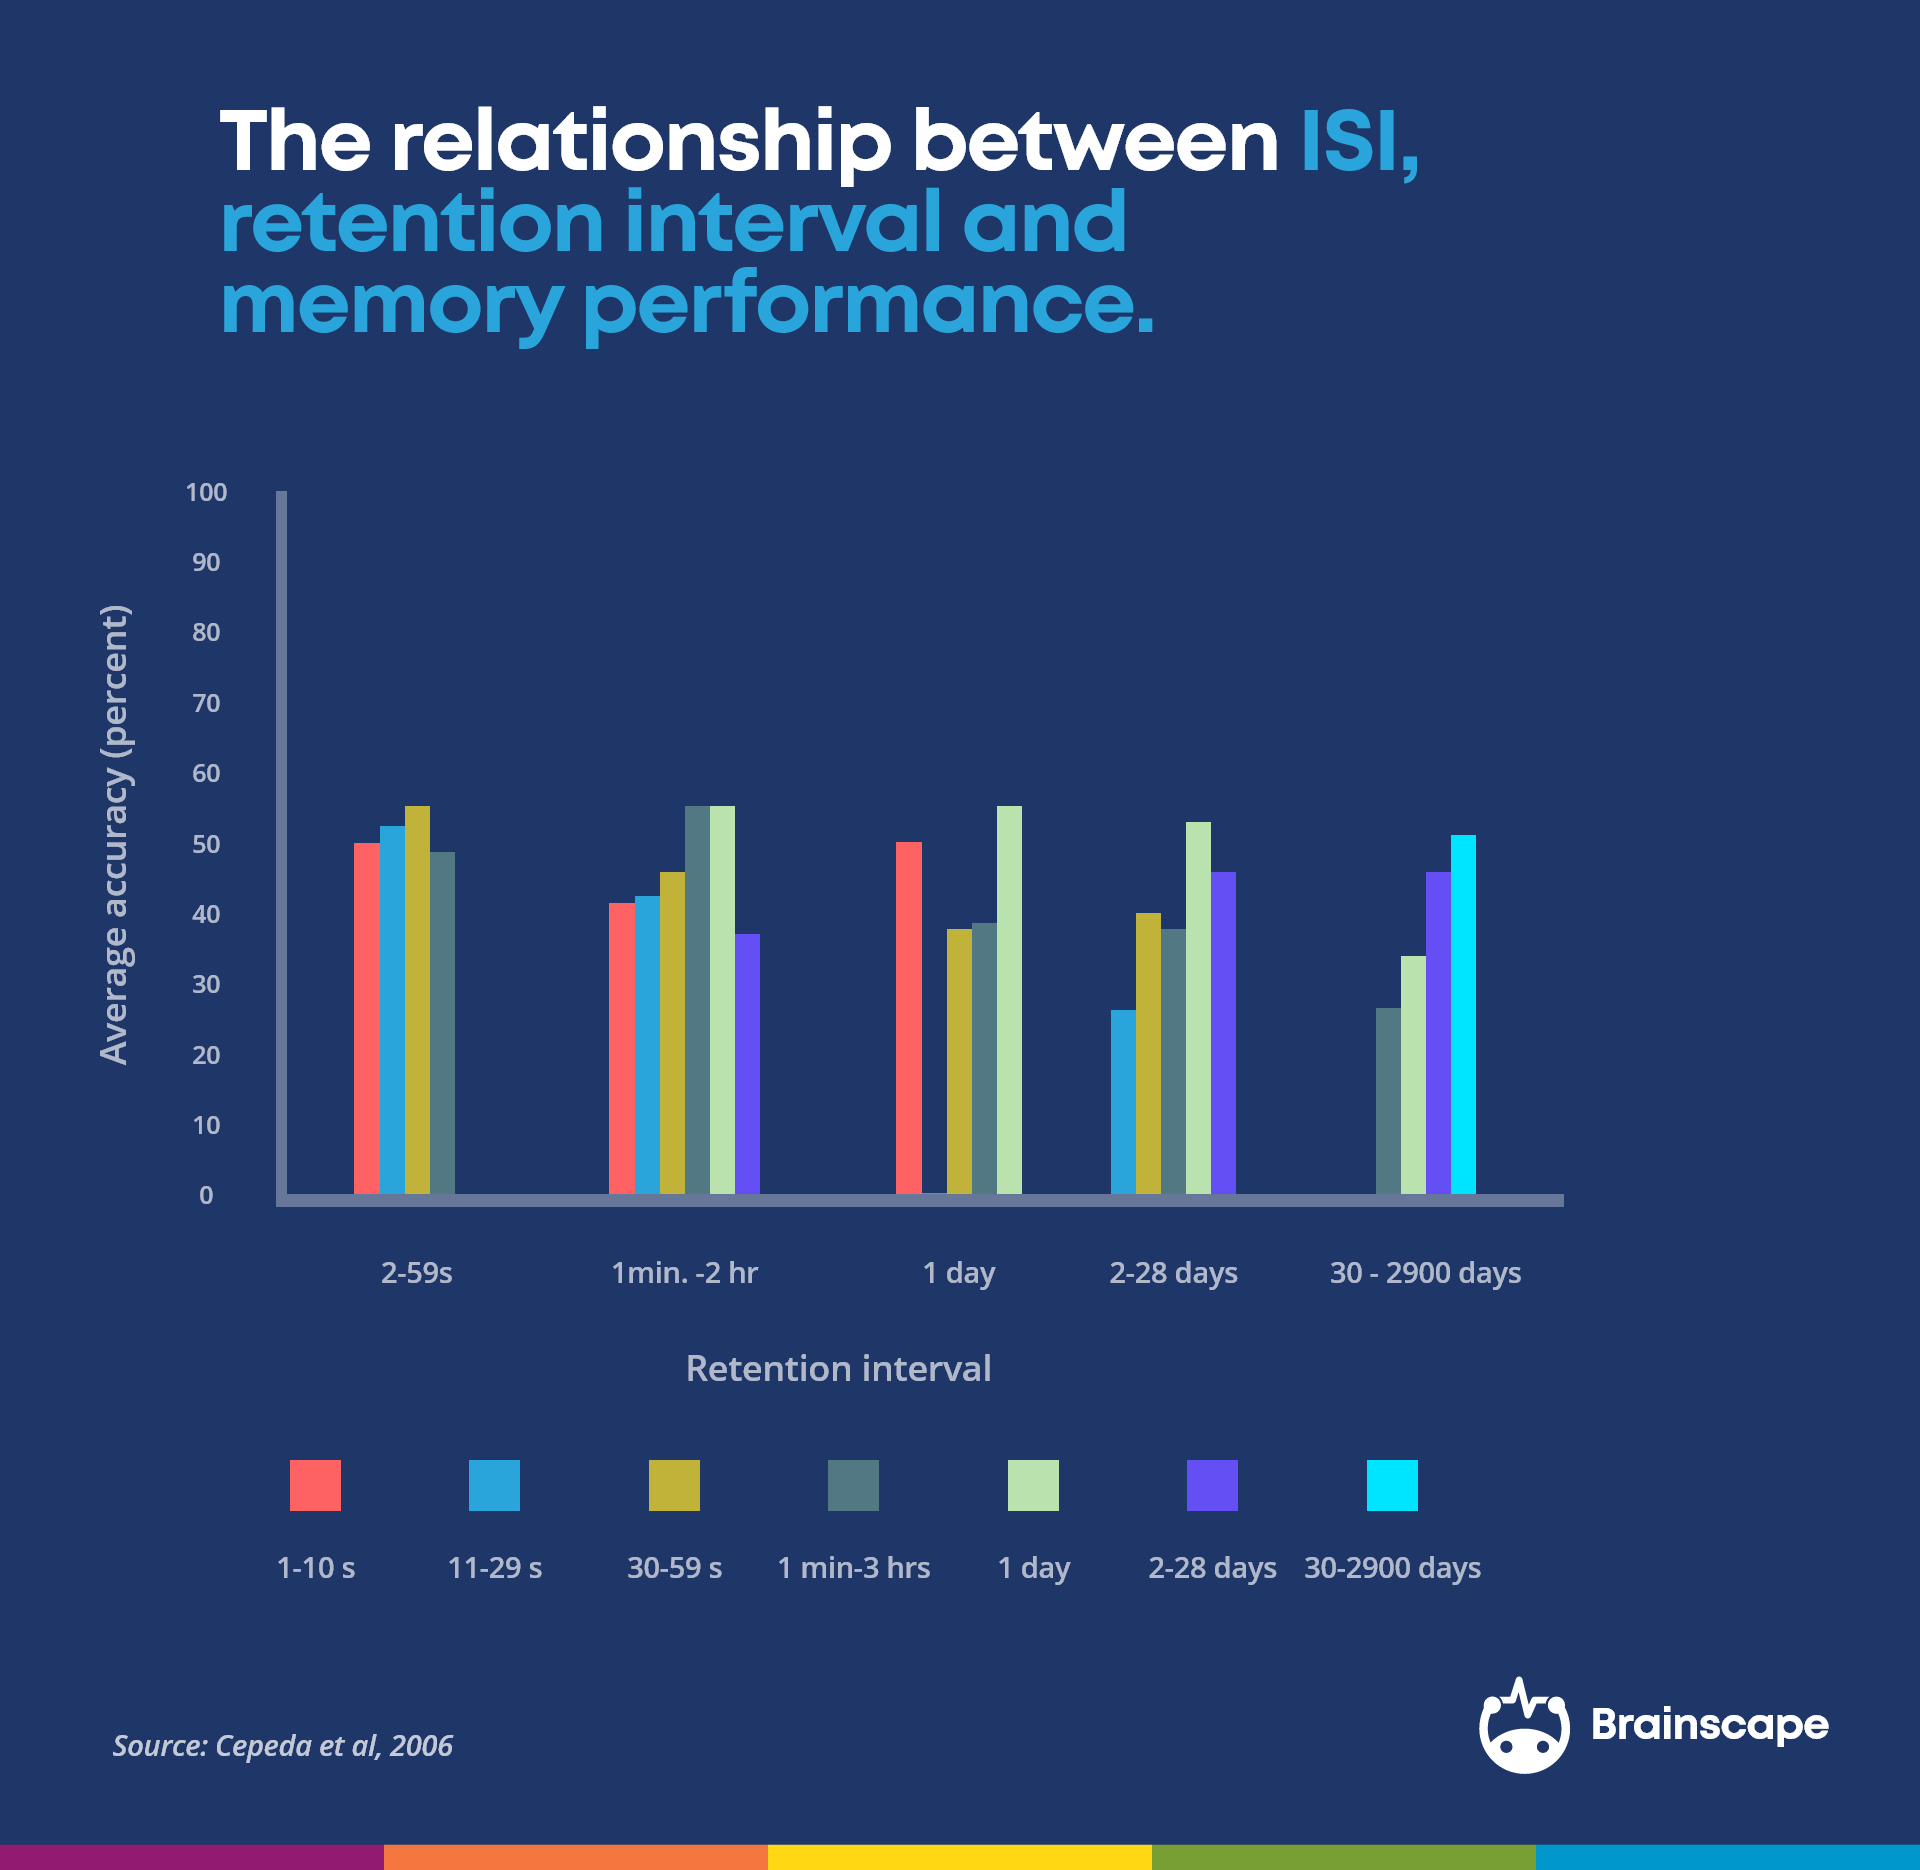 inter-study interval memory performance ISI cepeda 2006